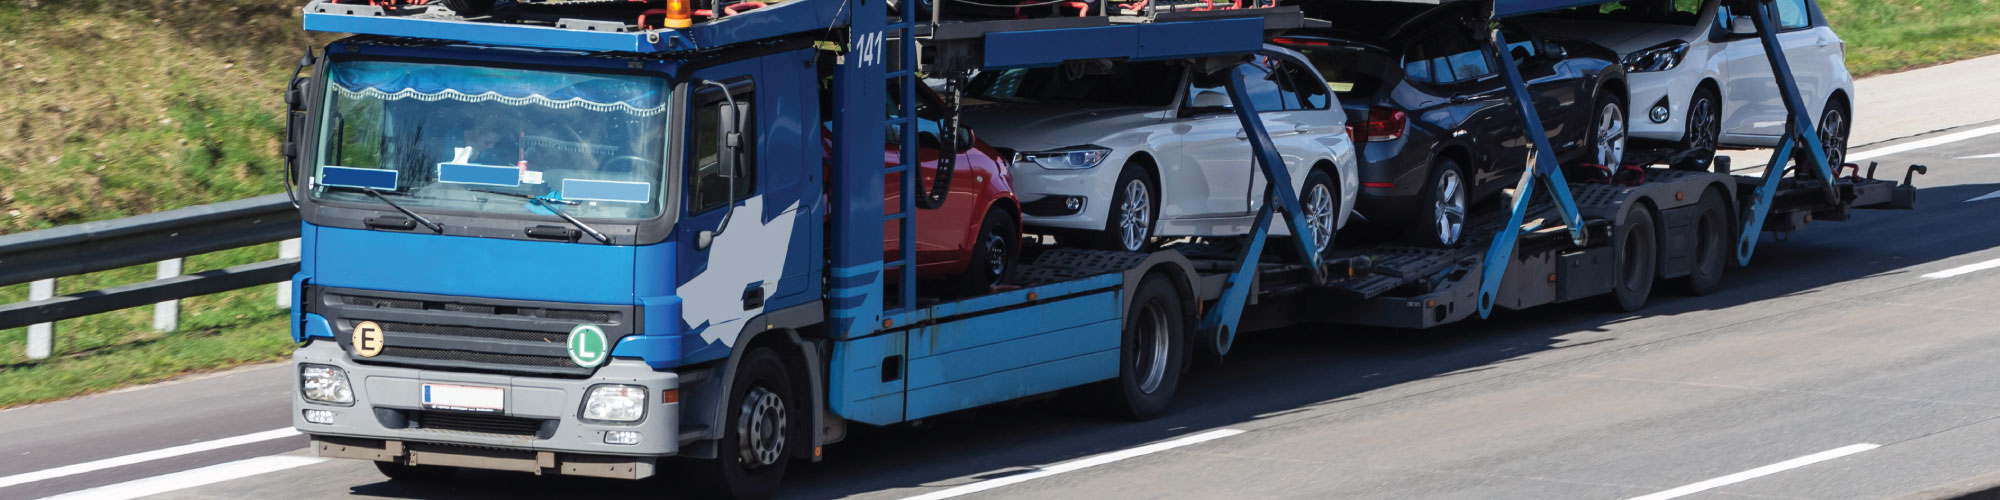 How to Find A Legit Auto Transport Company